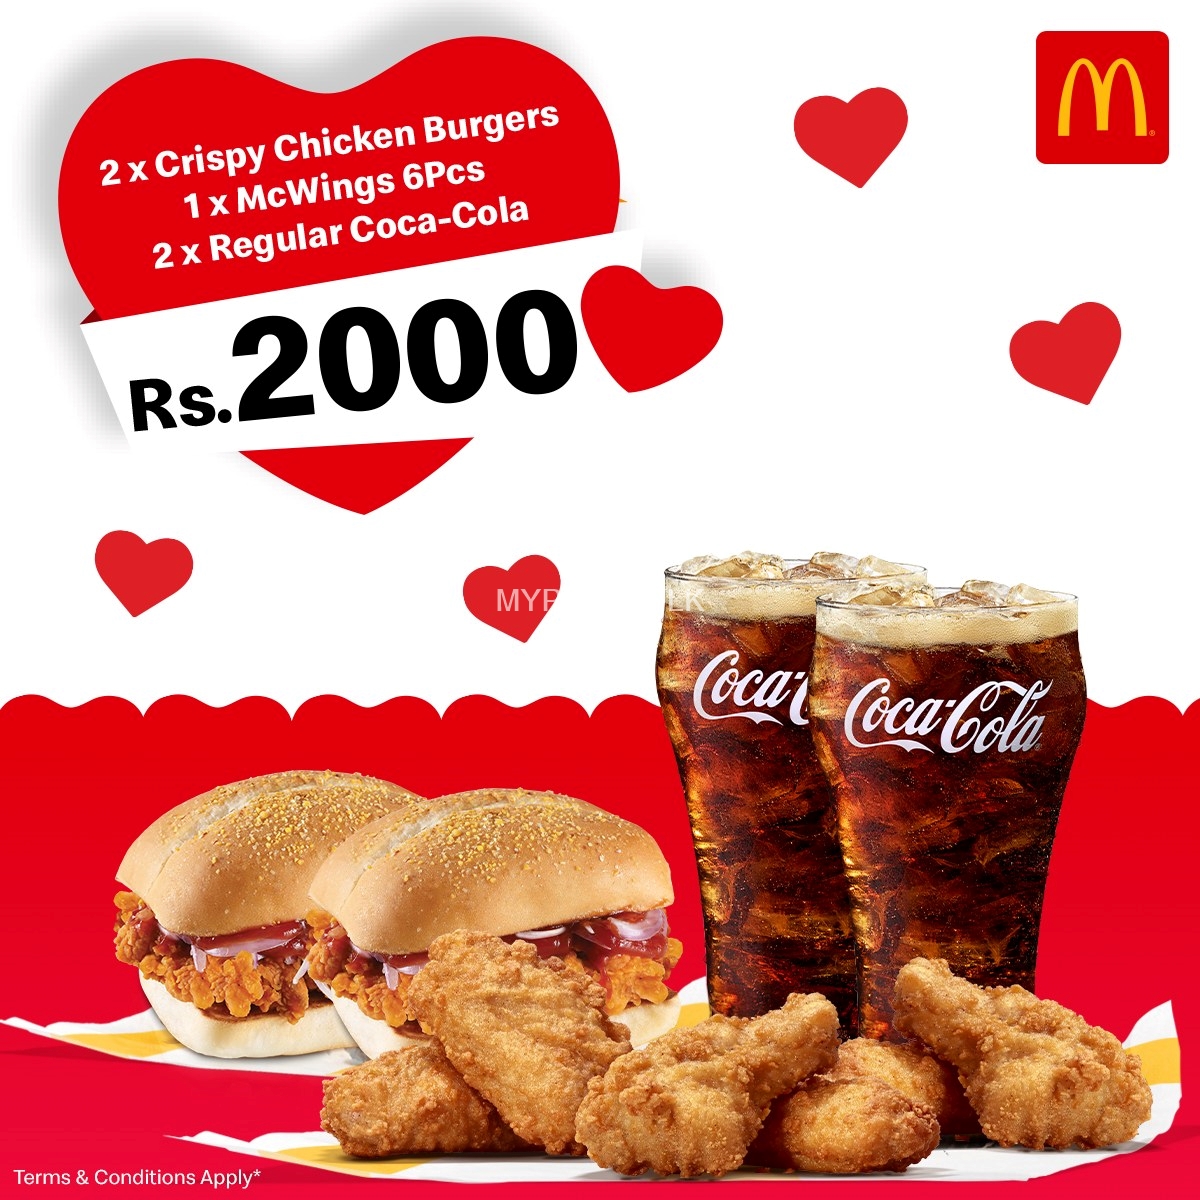 2 Crispy Chicken Burgers, 6 McWings & 2 Coca-Cola for just Rs.2000 at McDonalds Sri Lanka